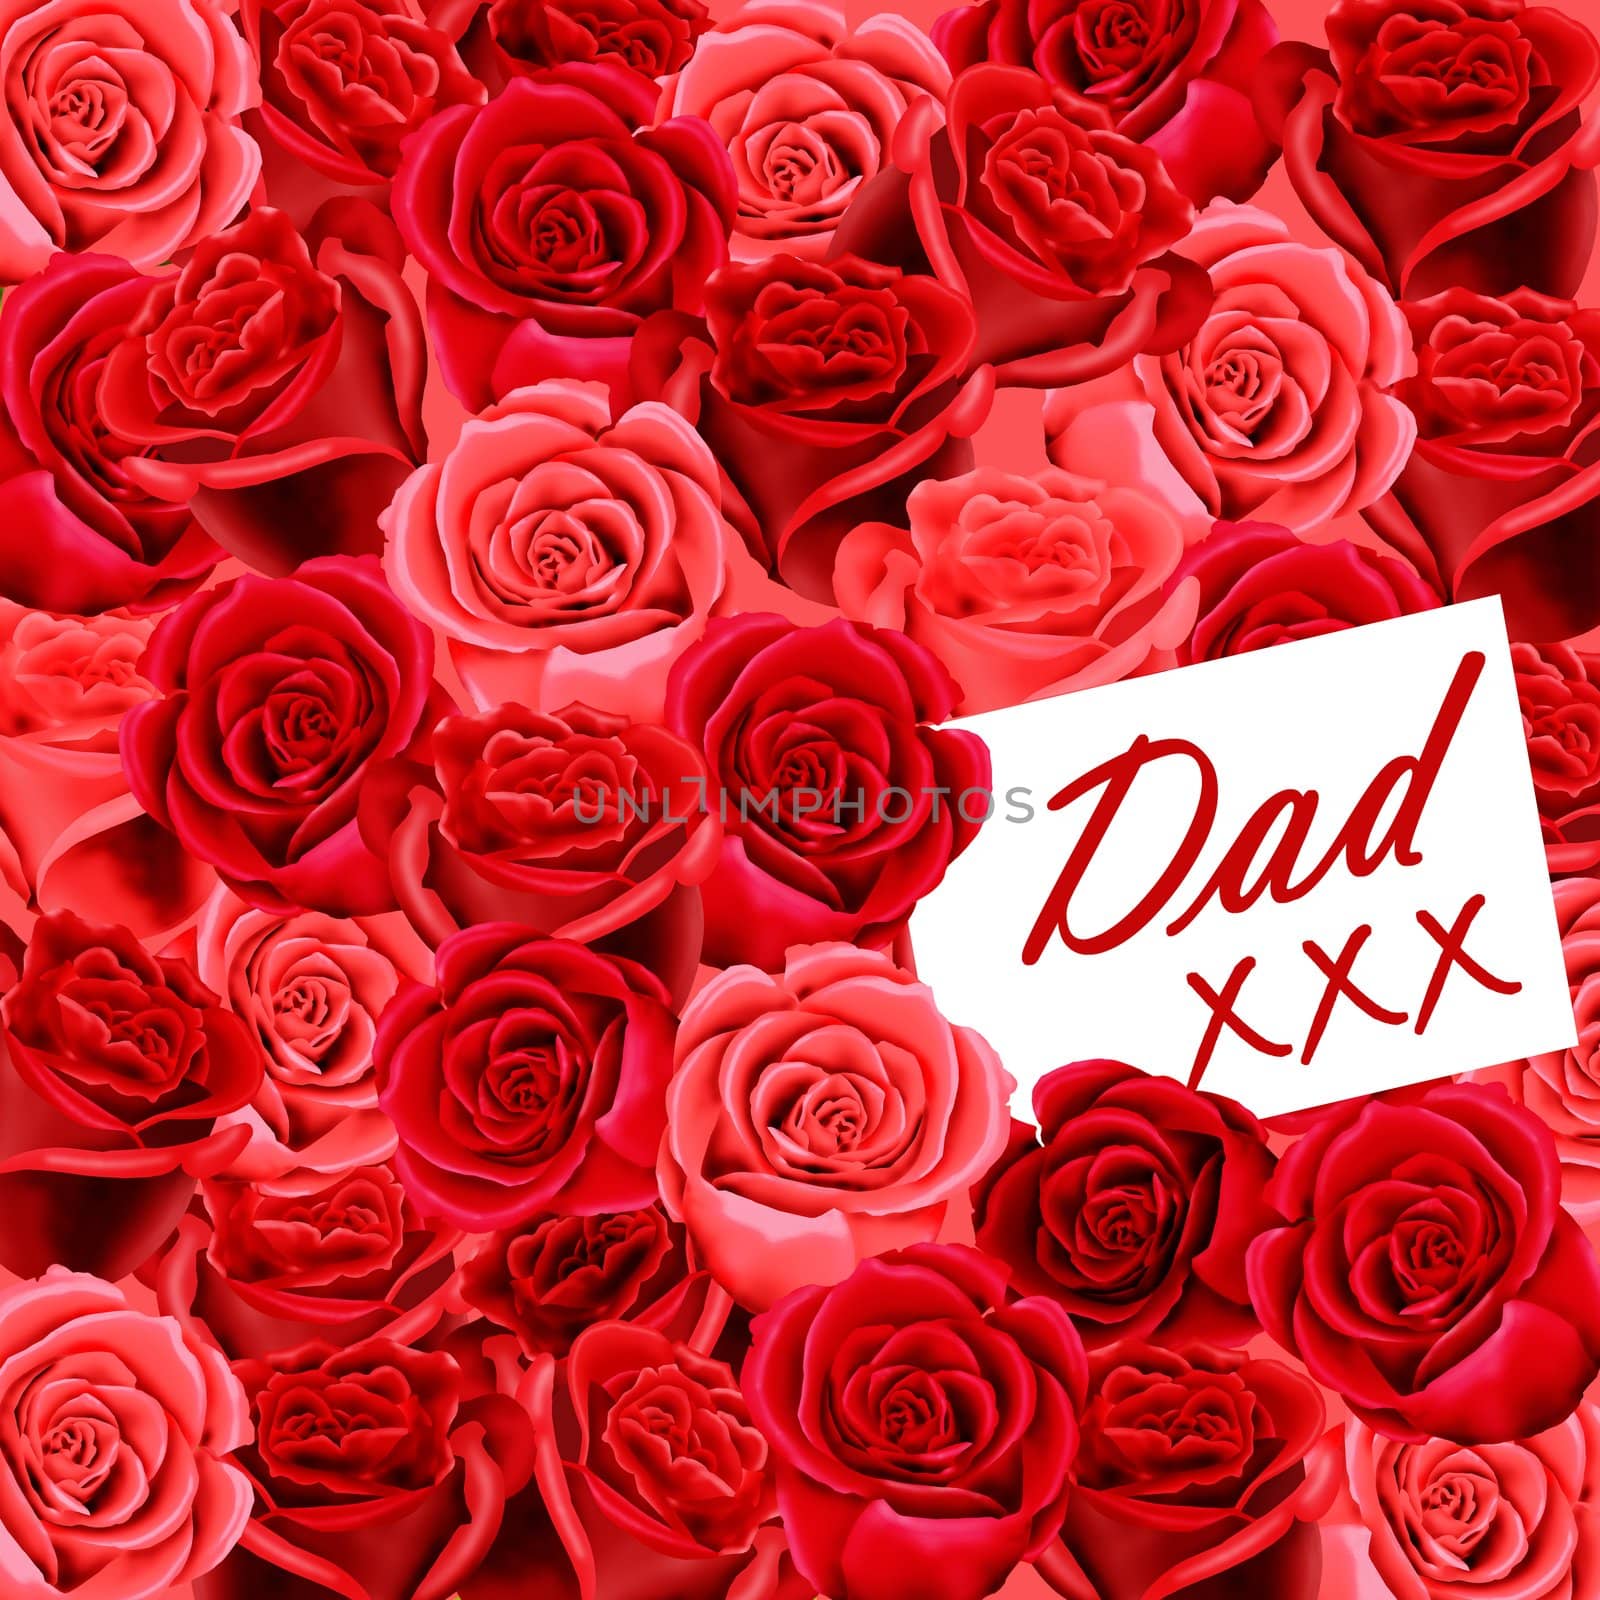 Dad xxx on a card on a wallpaper of red roses by acremead